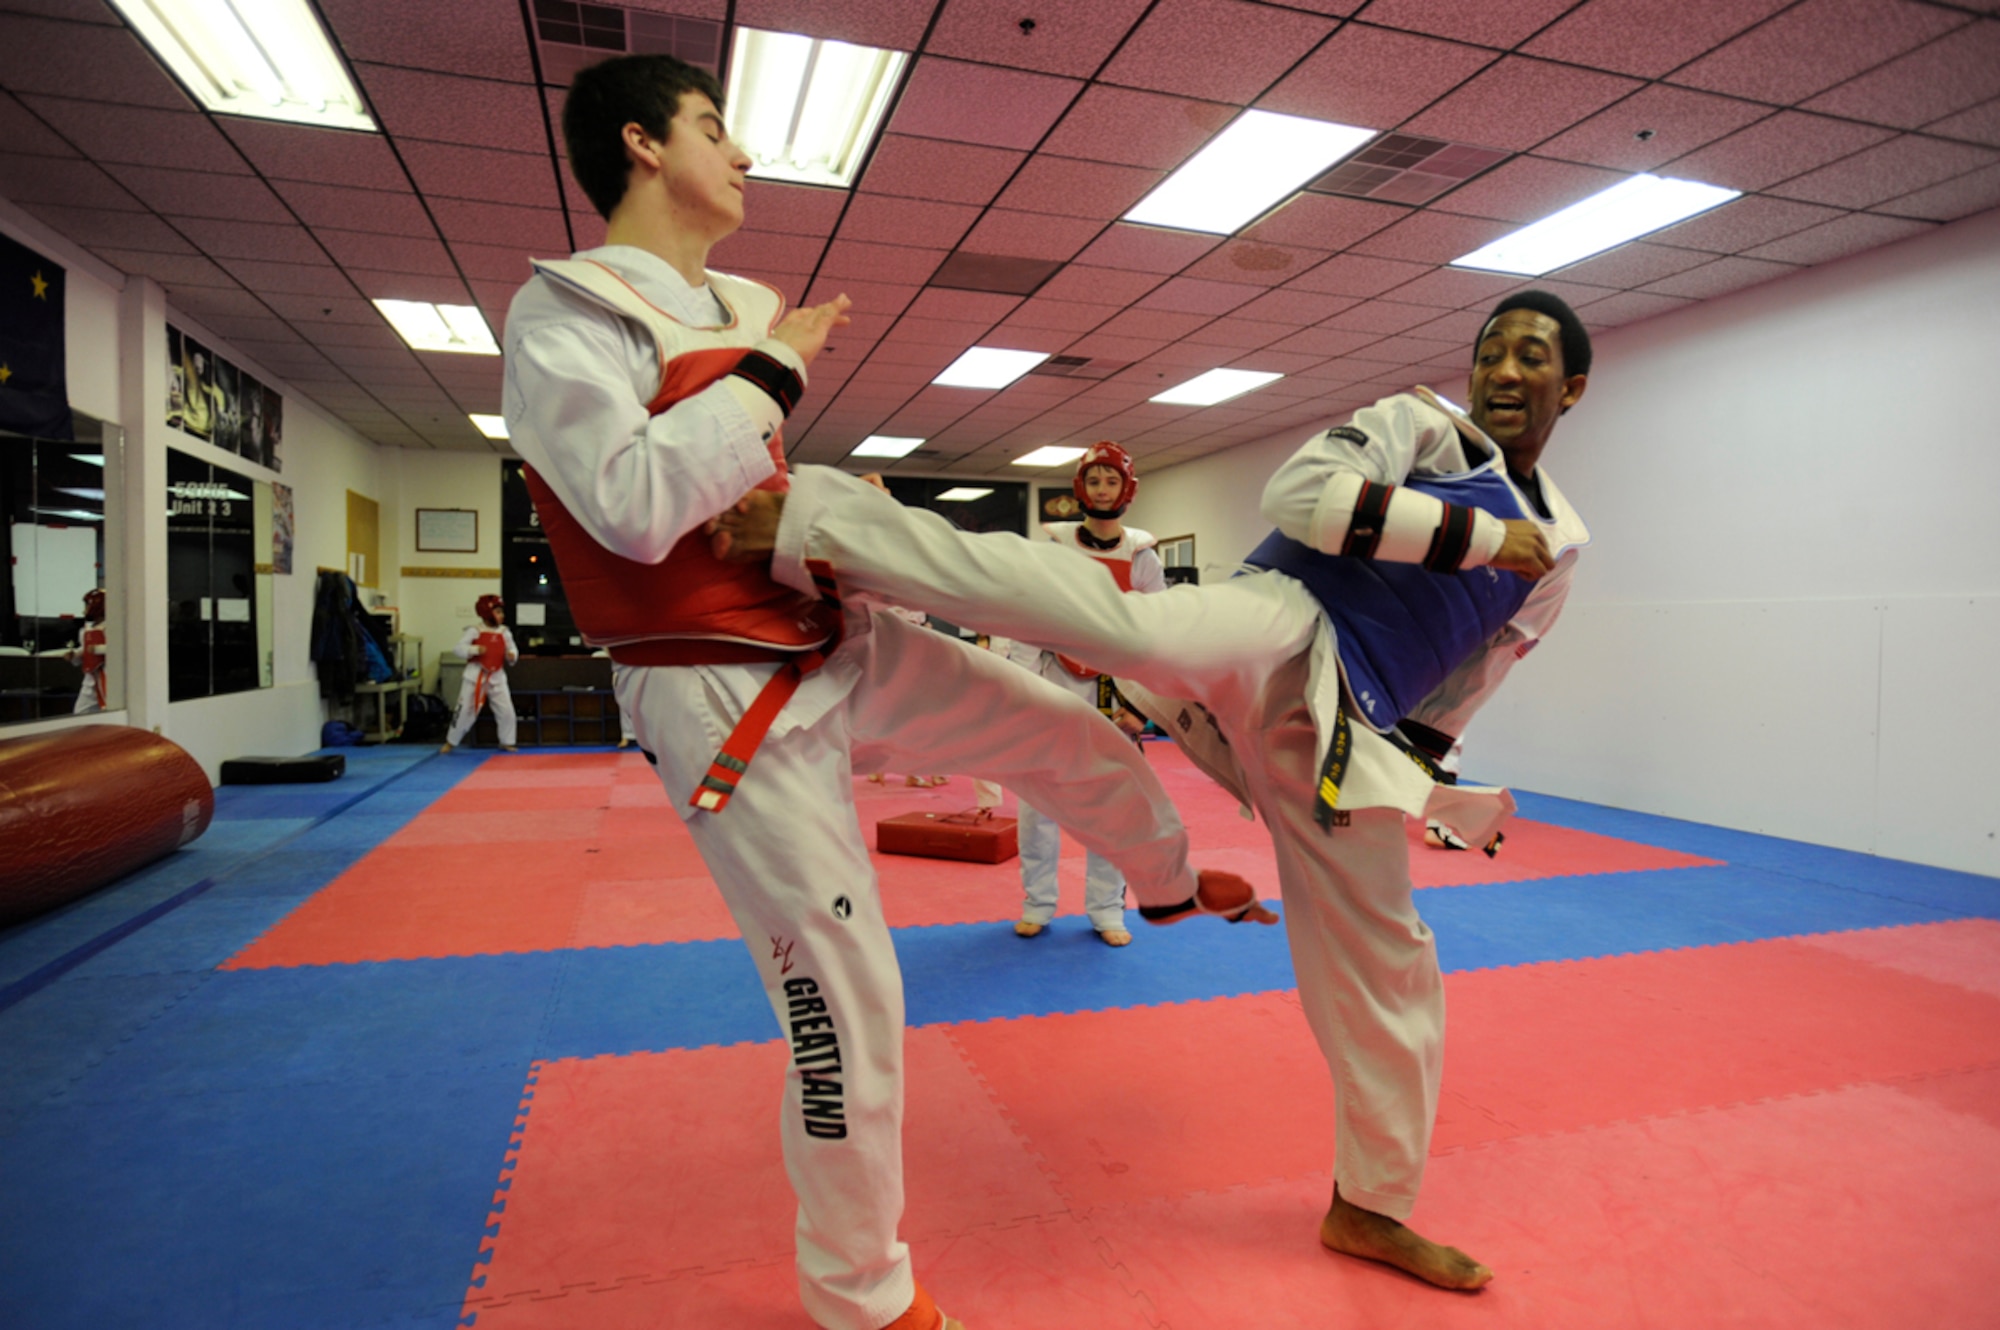 Quinton Beach kicks Micah Foreman, 16, back during practice at a Taekwondo Elite USA class in Anchorage March 7, 2014. Beach, a technical sergeant out of Joint Base Elmendorf-Richardson, Alaska, is a third-degree black belt in tang soo do and a first-degree black belt in taekwondo. (U.S. Air Force photo/Staff Sgt. Robert Barnett)